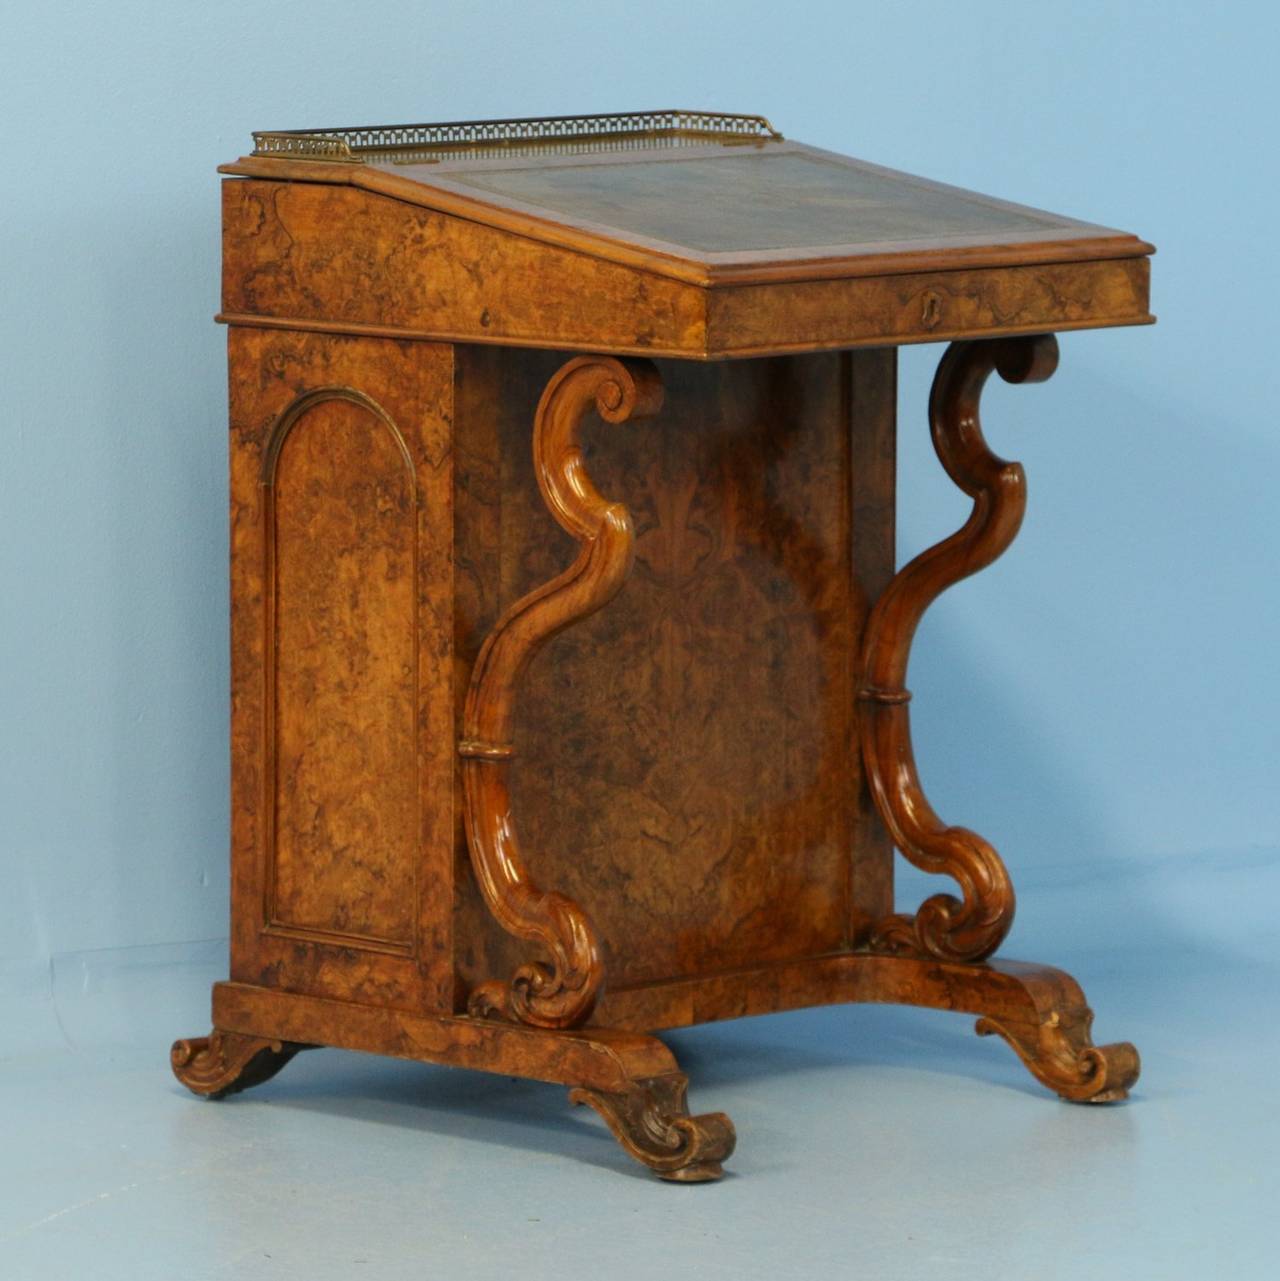 Stunning burled walnut with elaborate carved legs are the hallmark of this elegant English Davenport desk. Please examine close up photos to appreciate the beauty of the wood, which is accented inside the desk with bird's-eye maple. The leather